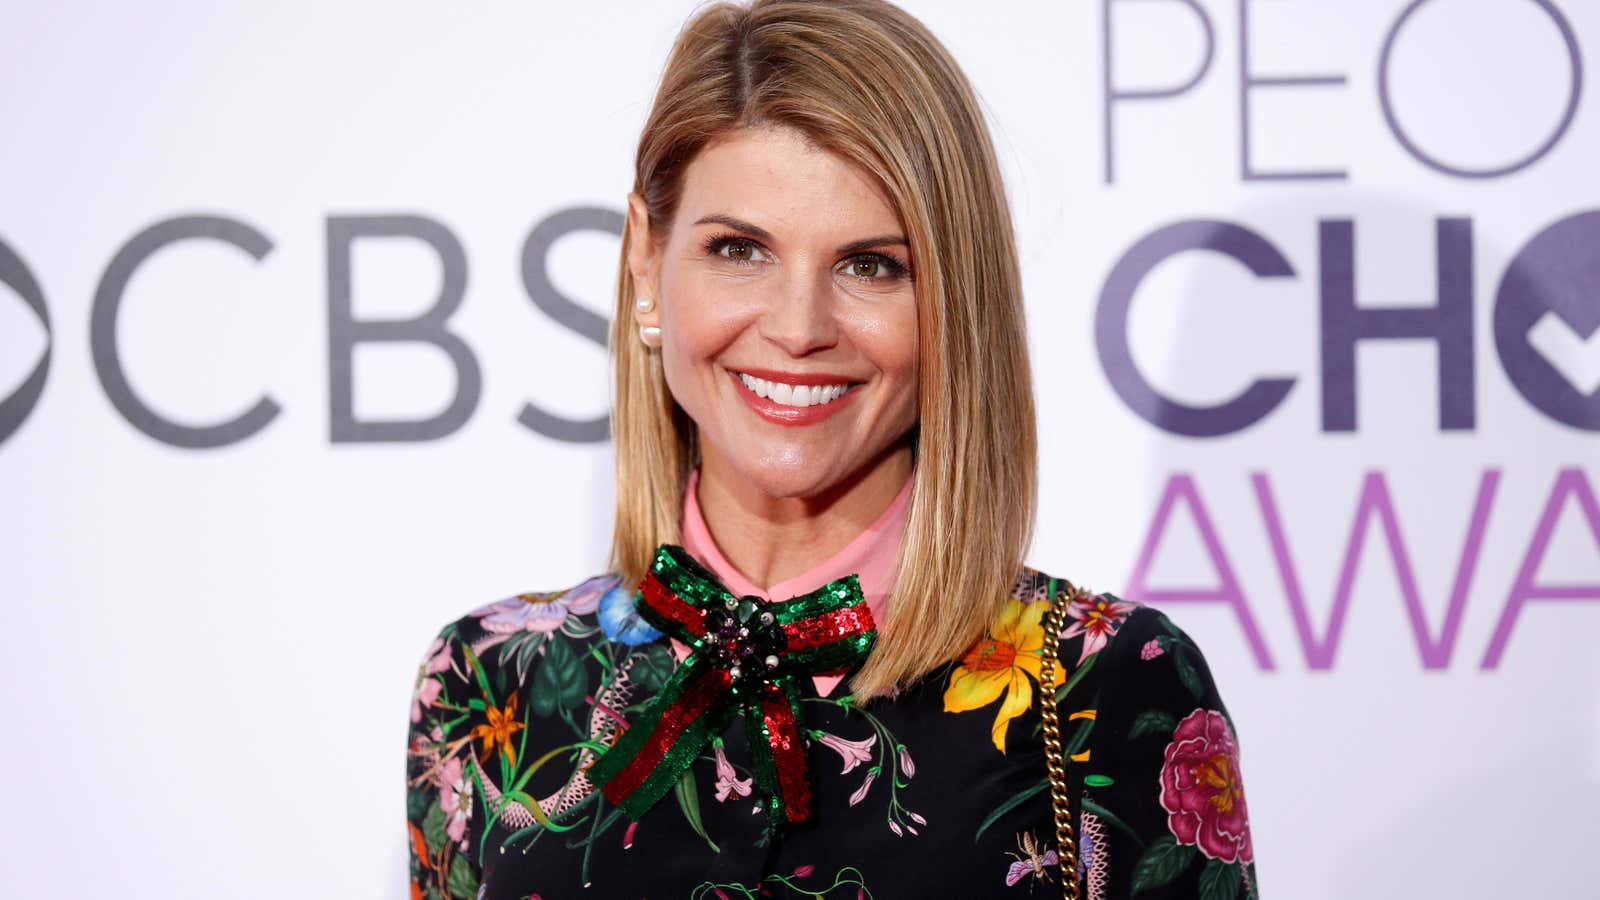 Lori Loughlin is probably not smiling right now.